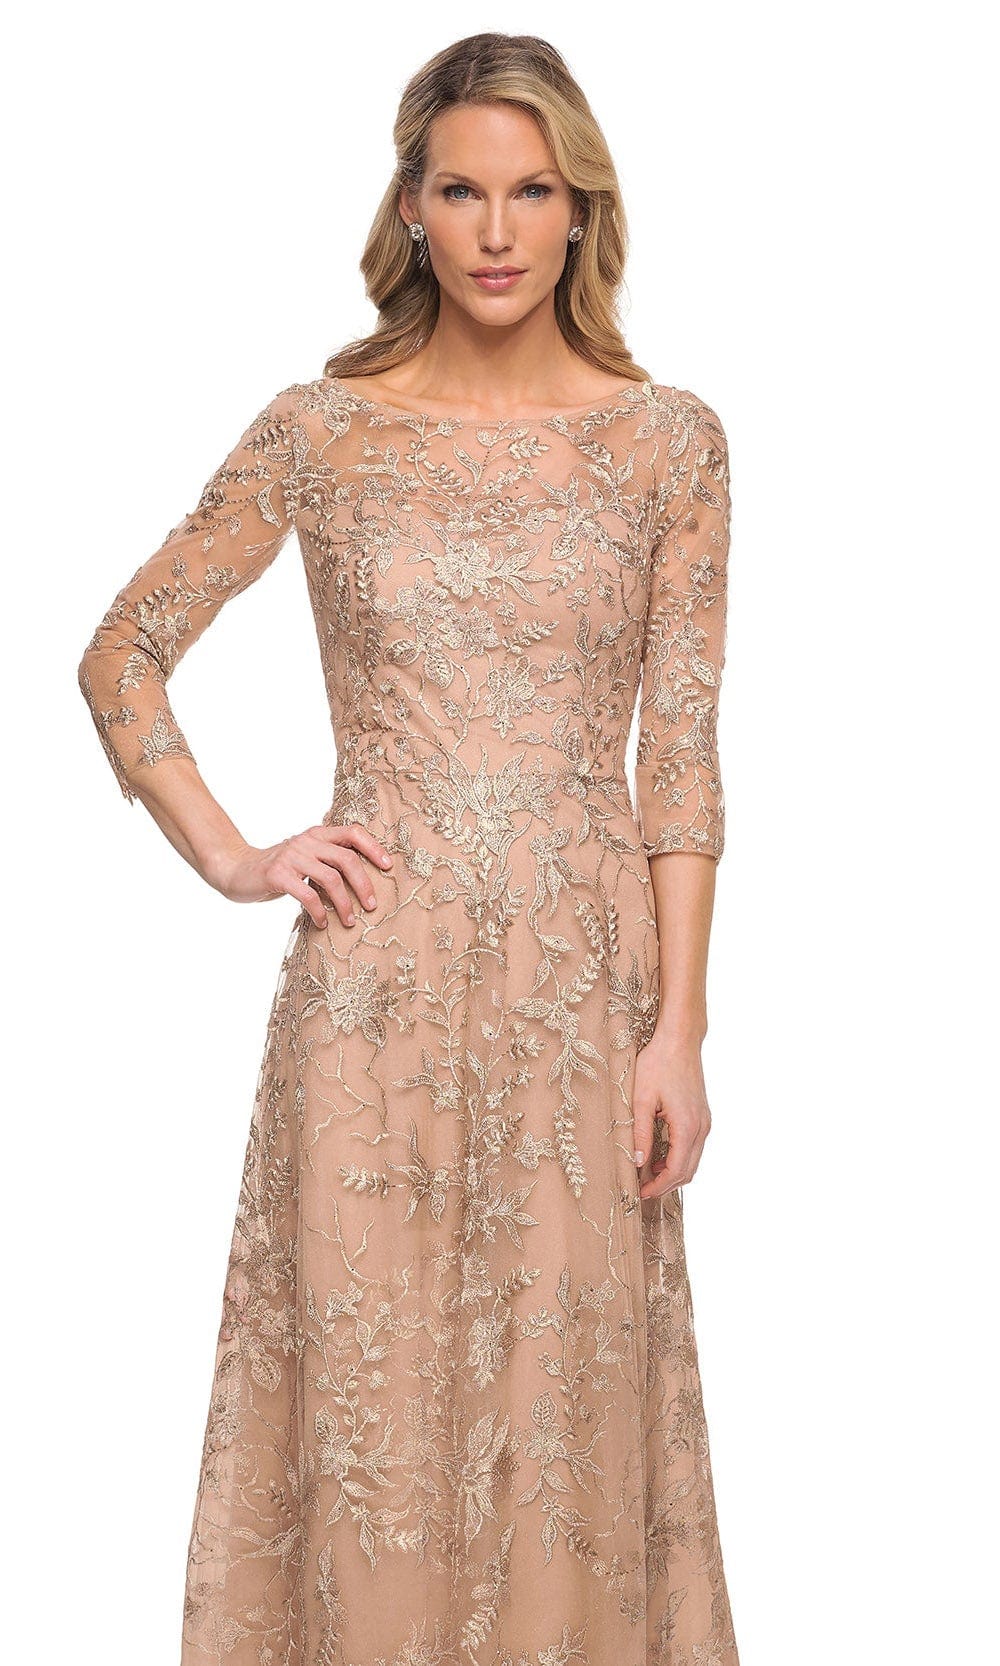 La Femme 30021 - Embroidered Sheer Lace Sheath Dress Special Occasion Dress